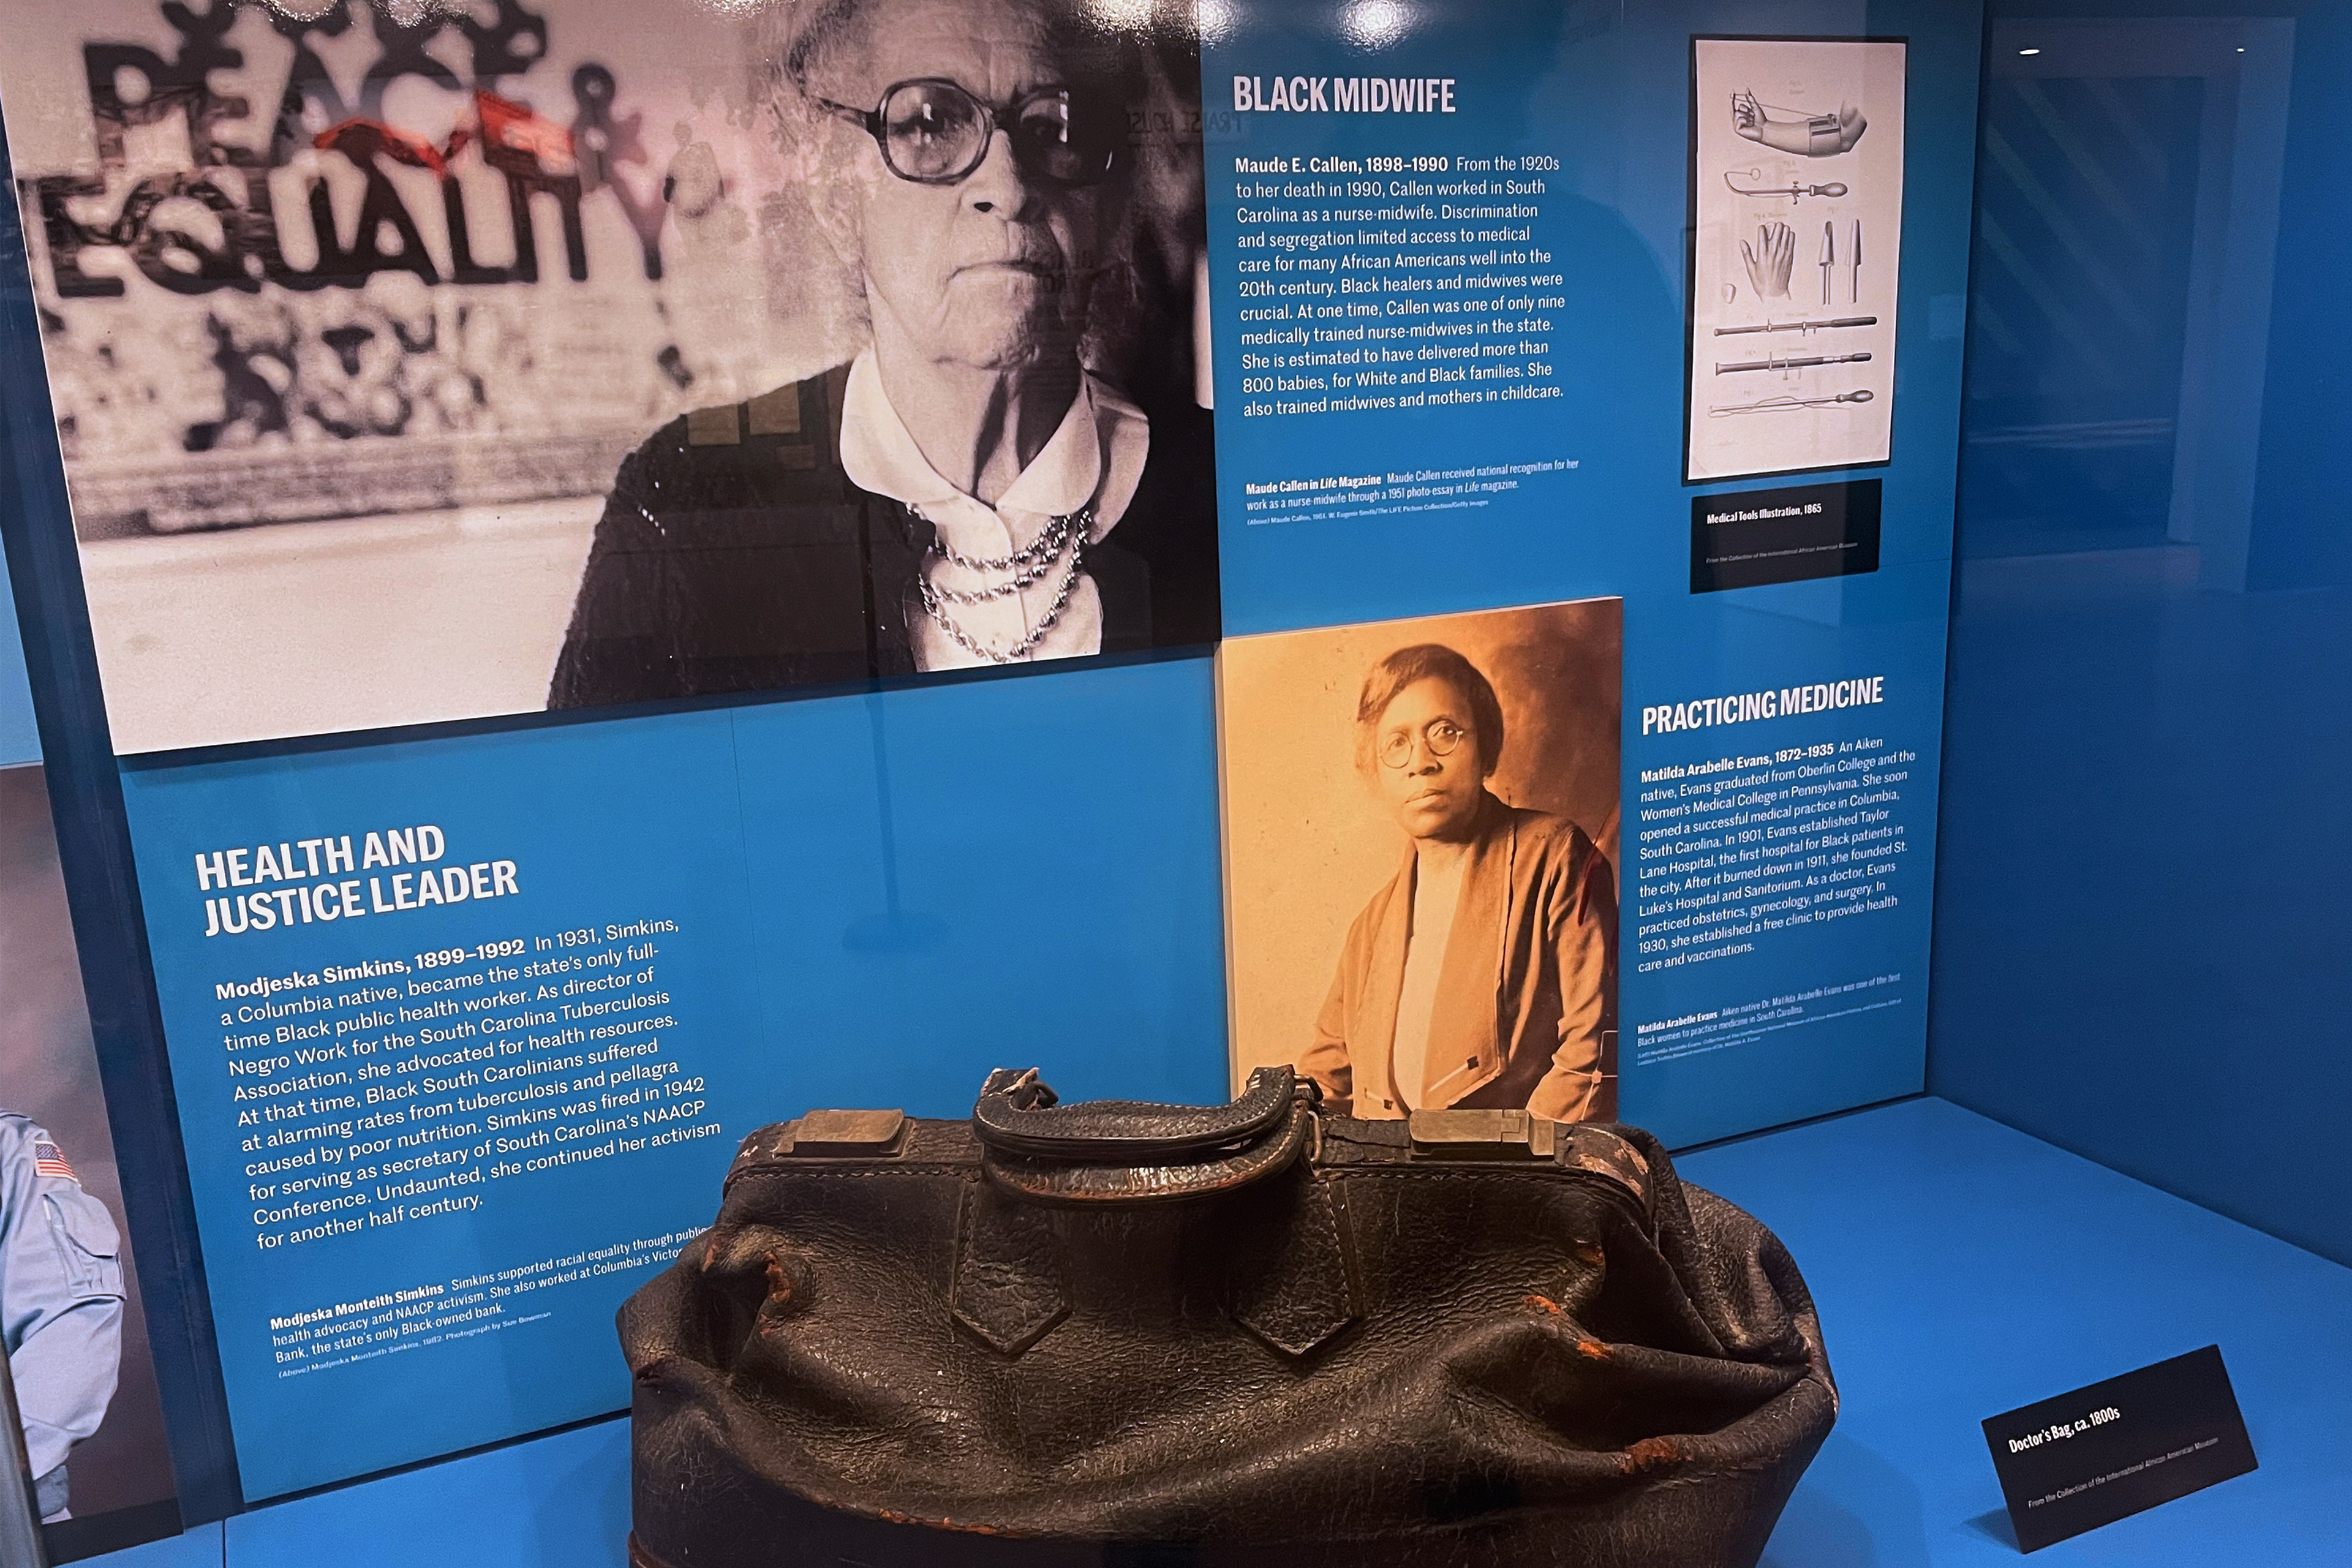 A photo of a museum exhibit showing a doctor's bag from the 1800s.